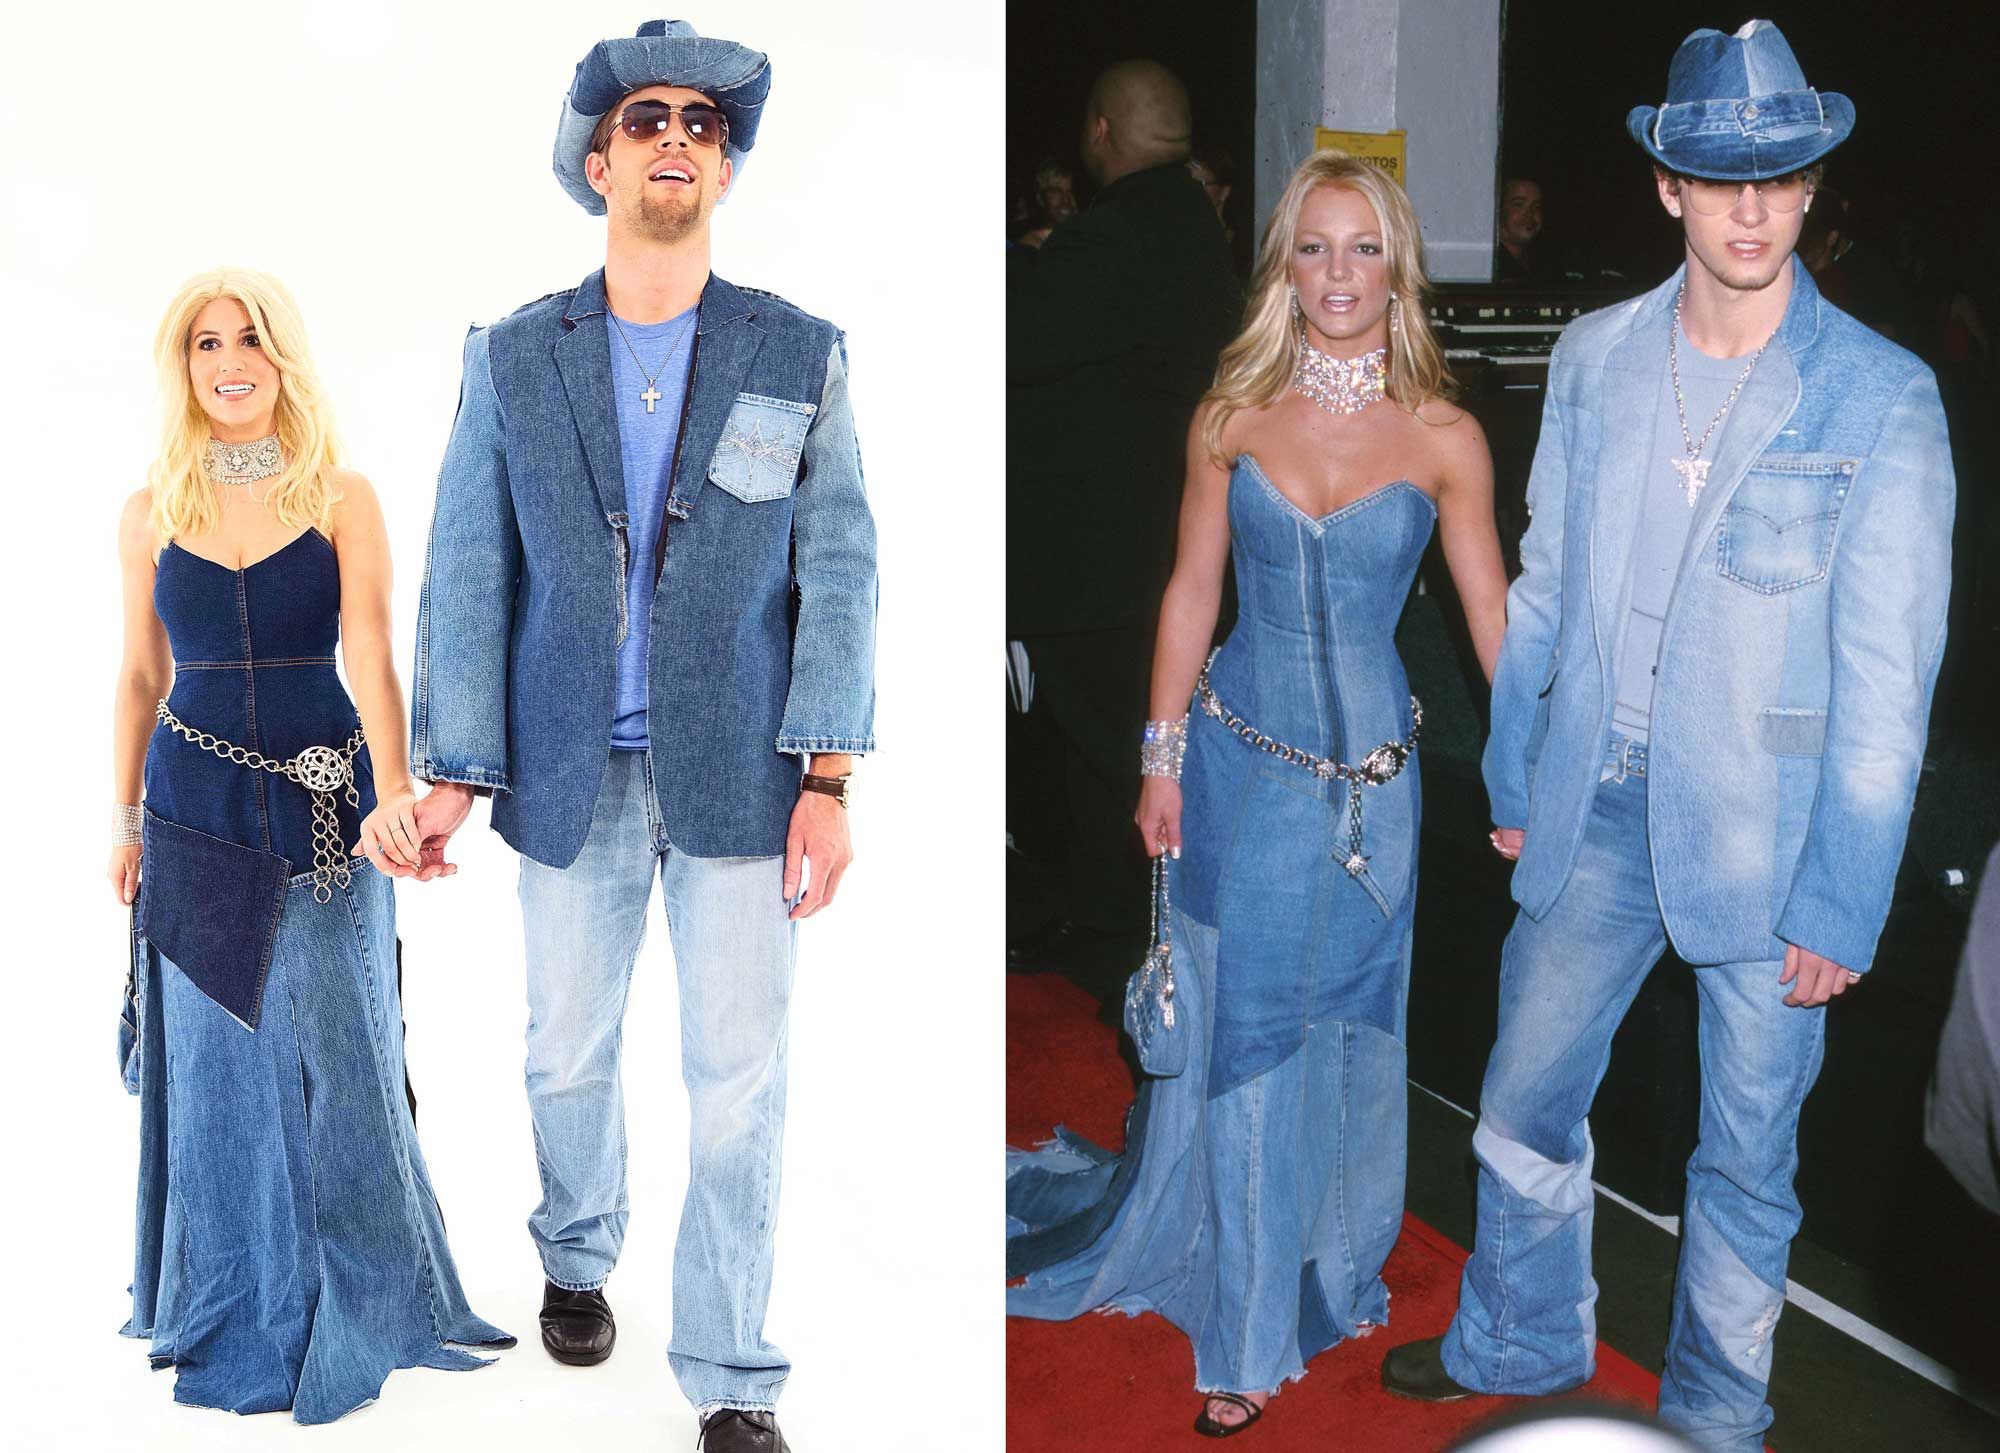 How to Make a Denim Britney and Justin Costume for Halloween